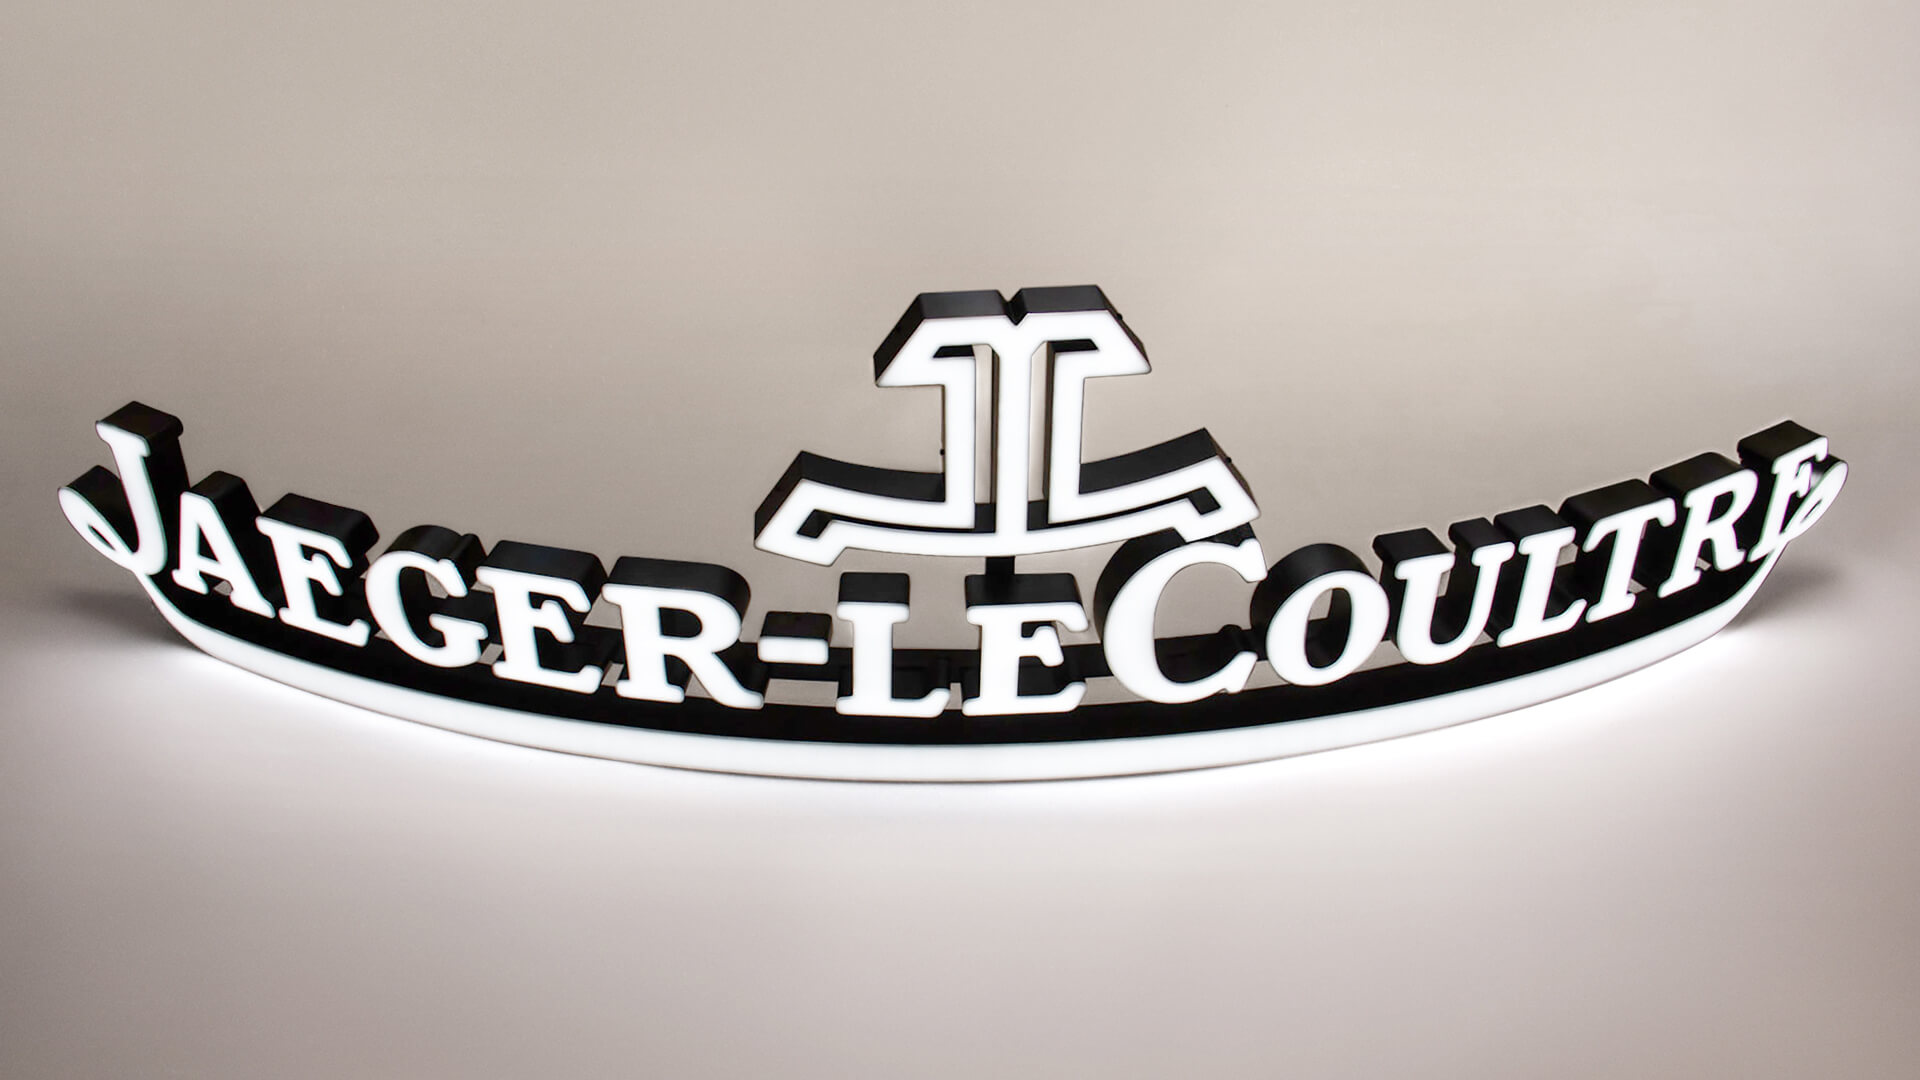 Jaeger-LeCoultre - Frontbeleuchtetes Logo in Weiß